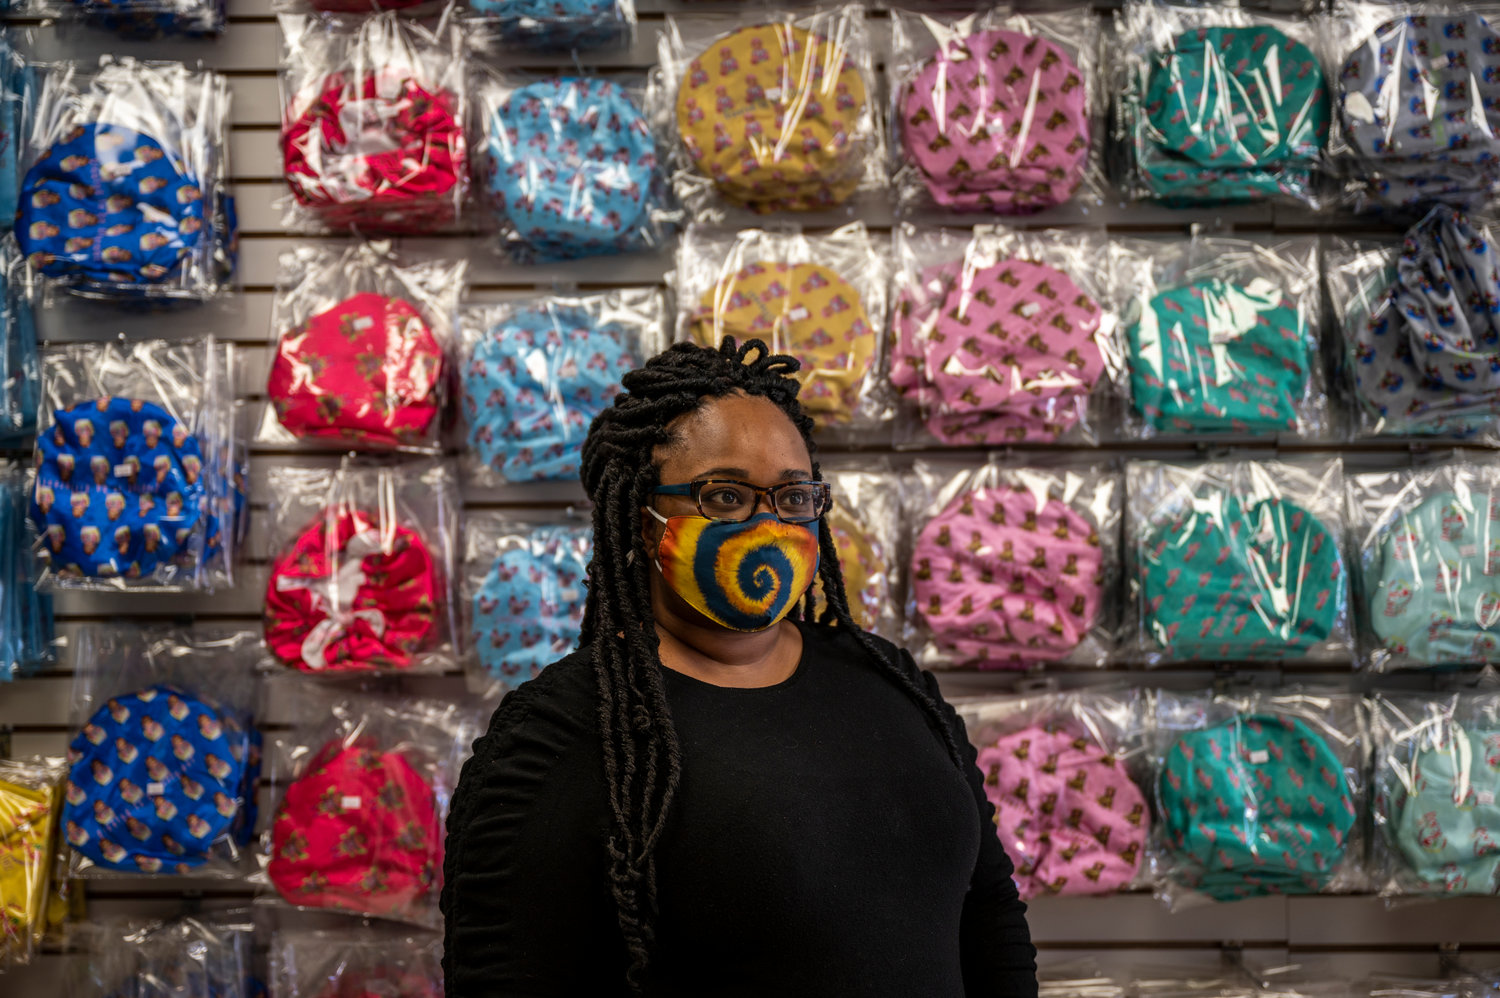 Racquel Johnson was inspired to start her new adaptive clothing store, KMJ Love Wear, after the death of her 5-year-old daughter, who had cerebral palsy. The Black-owned store opened in December and has had some struggles getting traffic to her North Riverdale storefront because of the coronavirus pandemic.